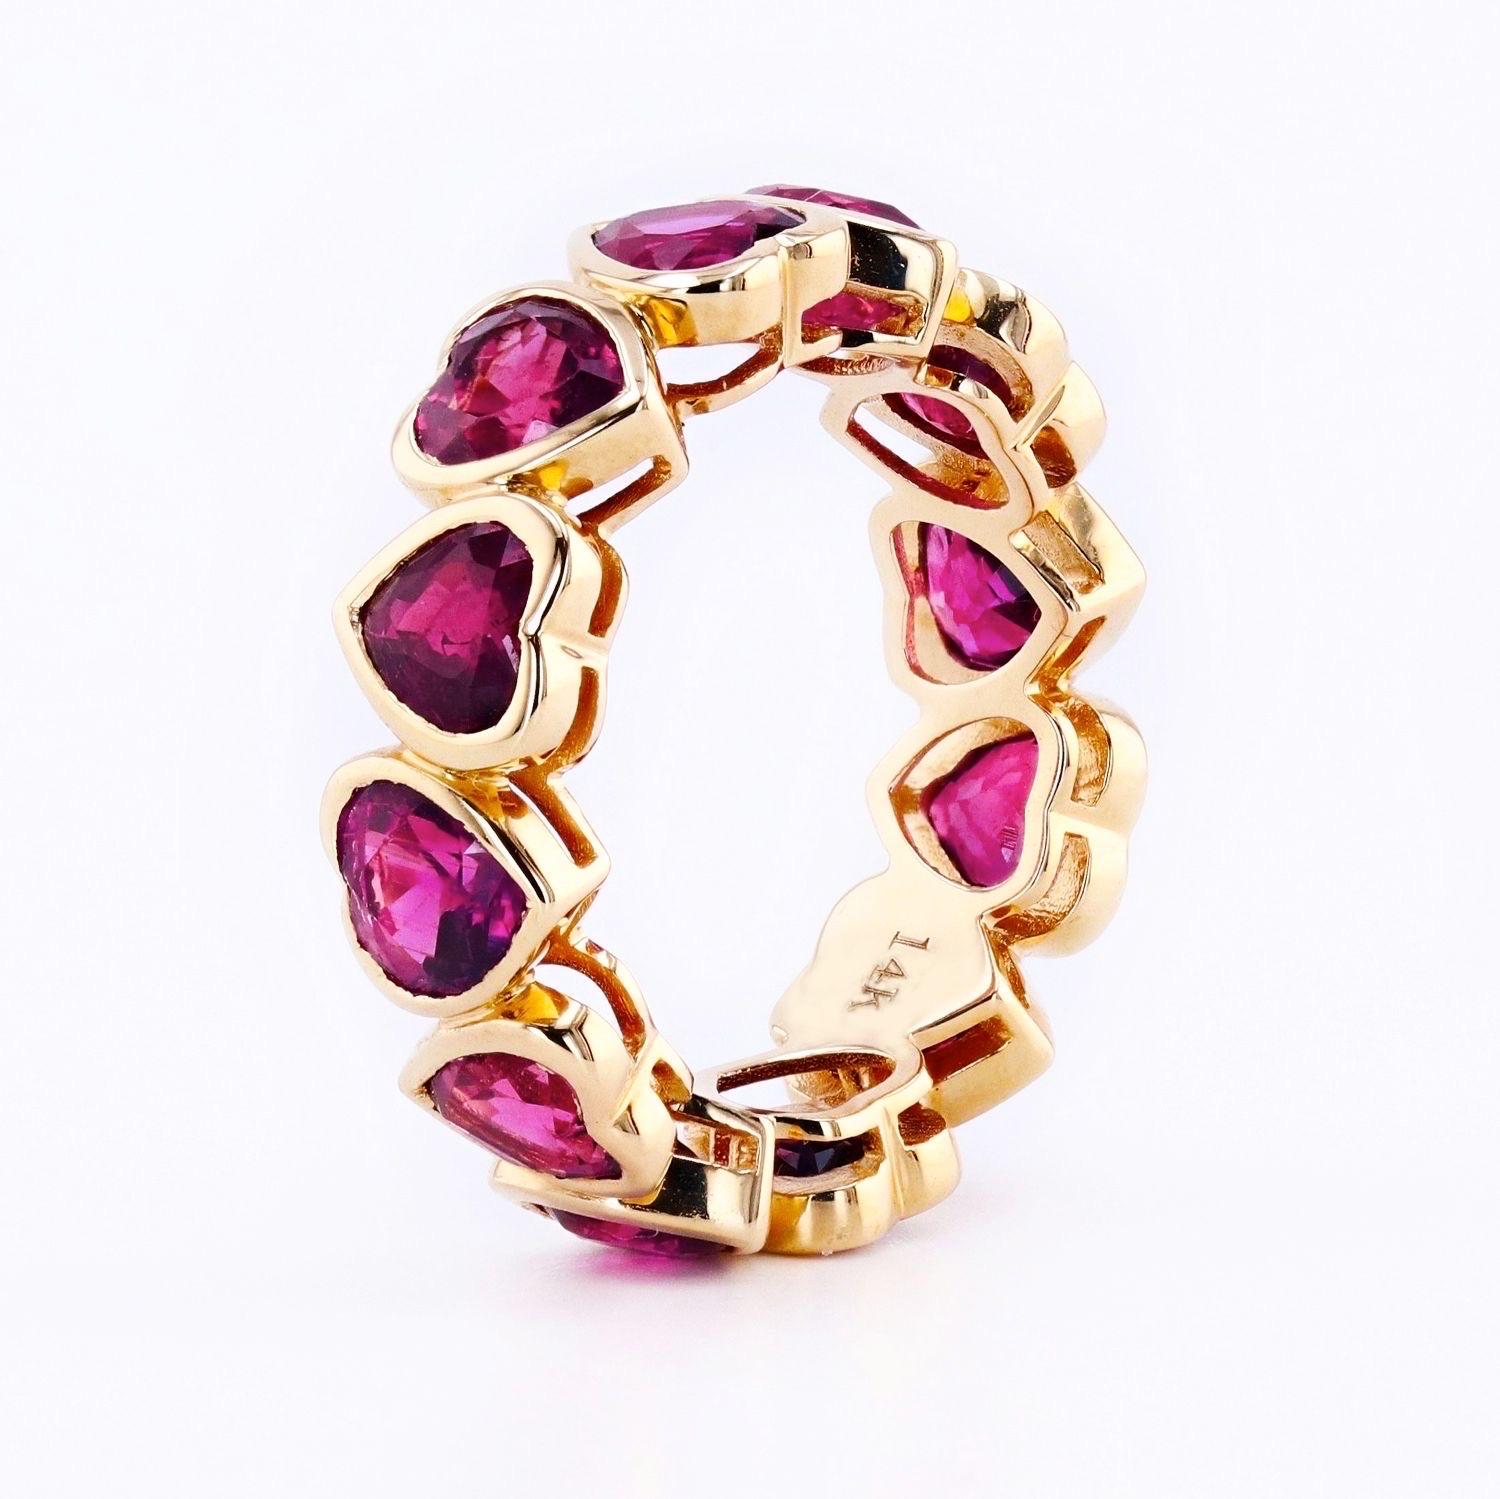 Natural Ruby Heart Band bezel set in 14k yellow gold. This band is so fun to add a pop of color to any outfit. 